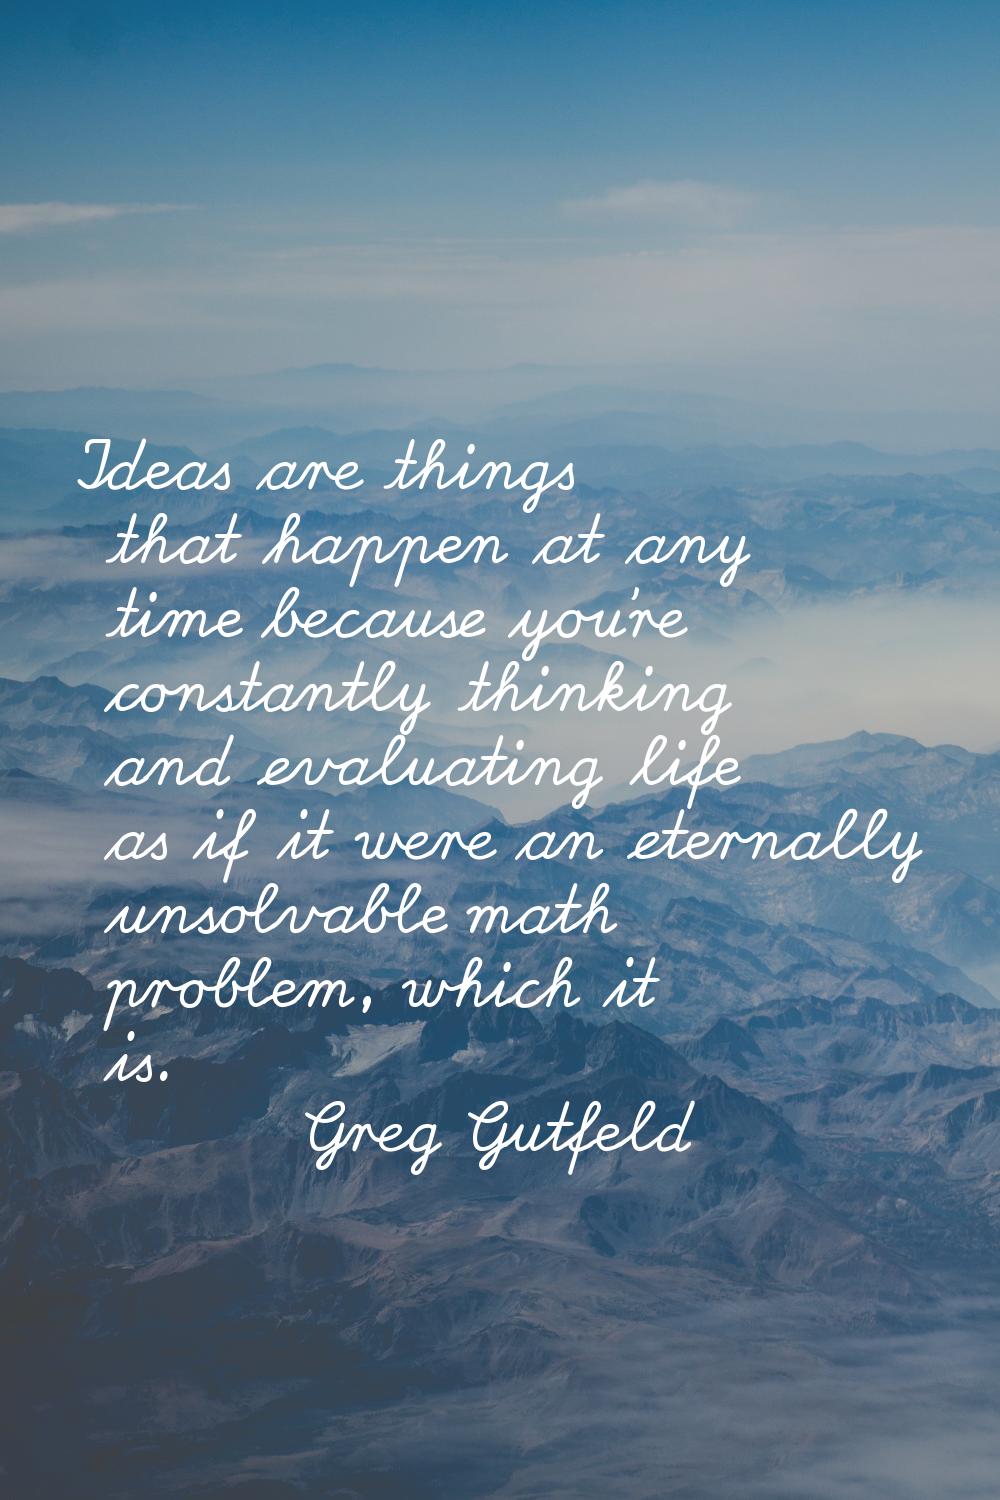 Ideas are things that happen at any time because you're constantly thinking and evaluating life as 